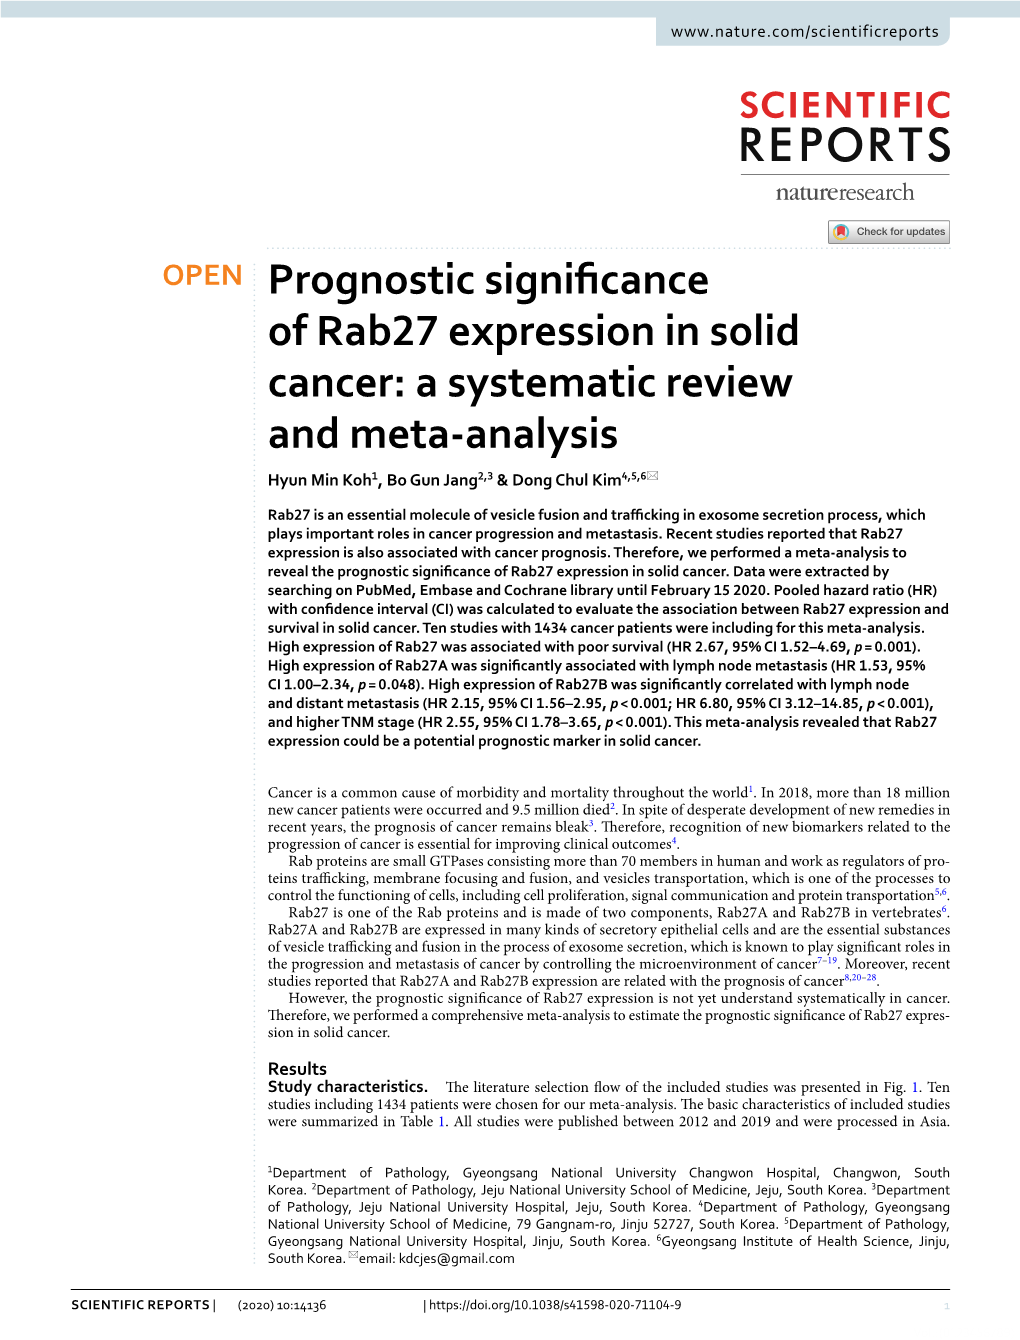 Prognostic Significance of Rab27 Expression in Solid Cancer